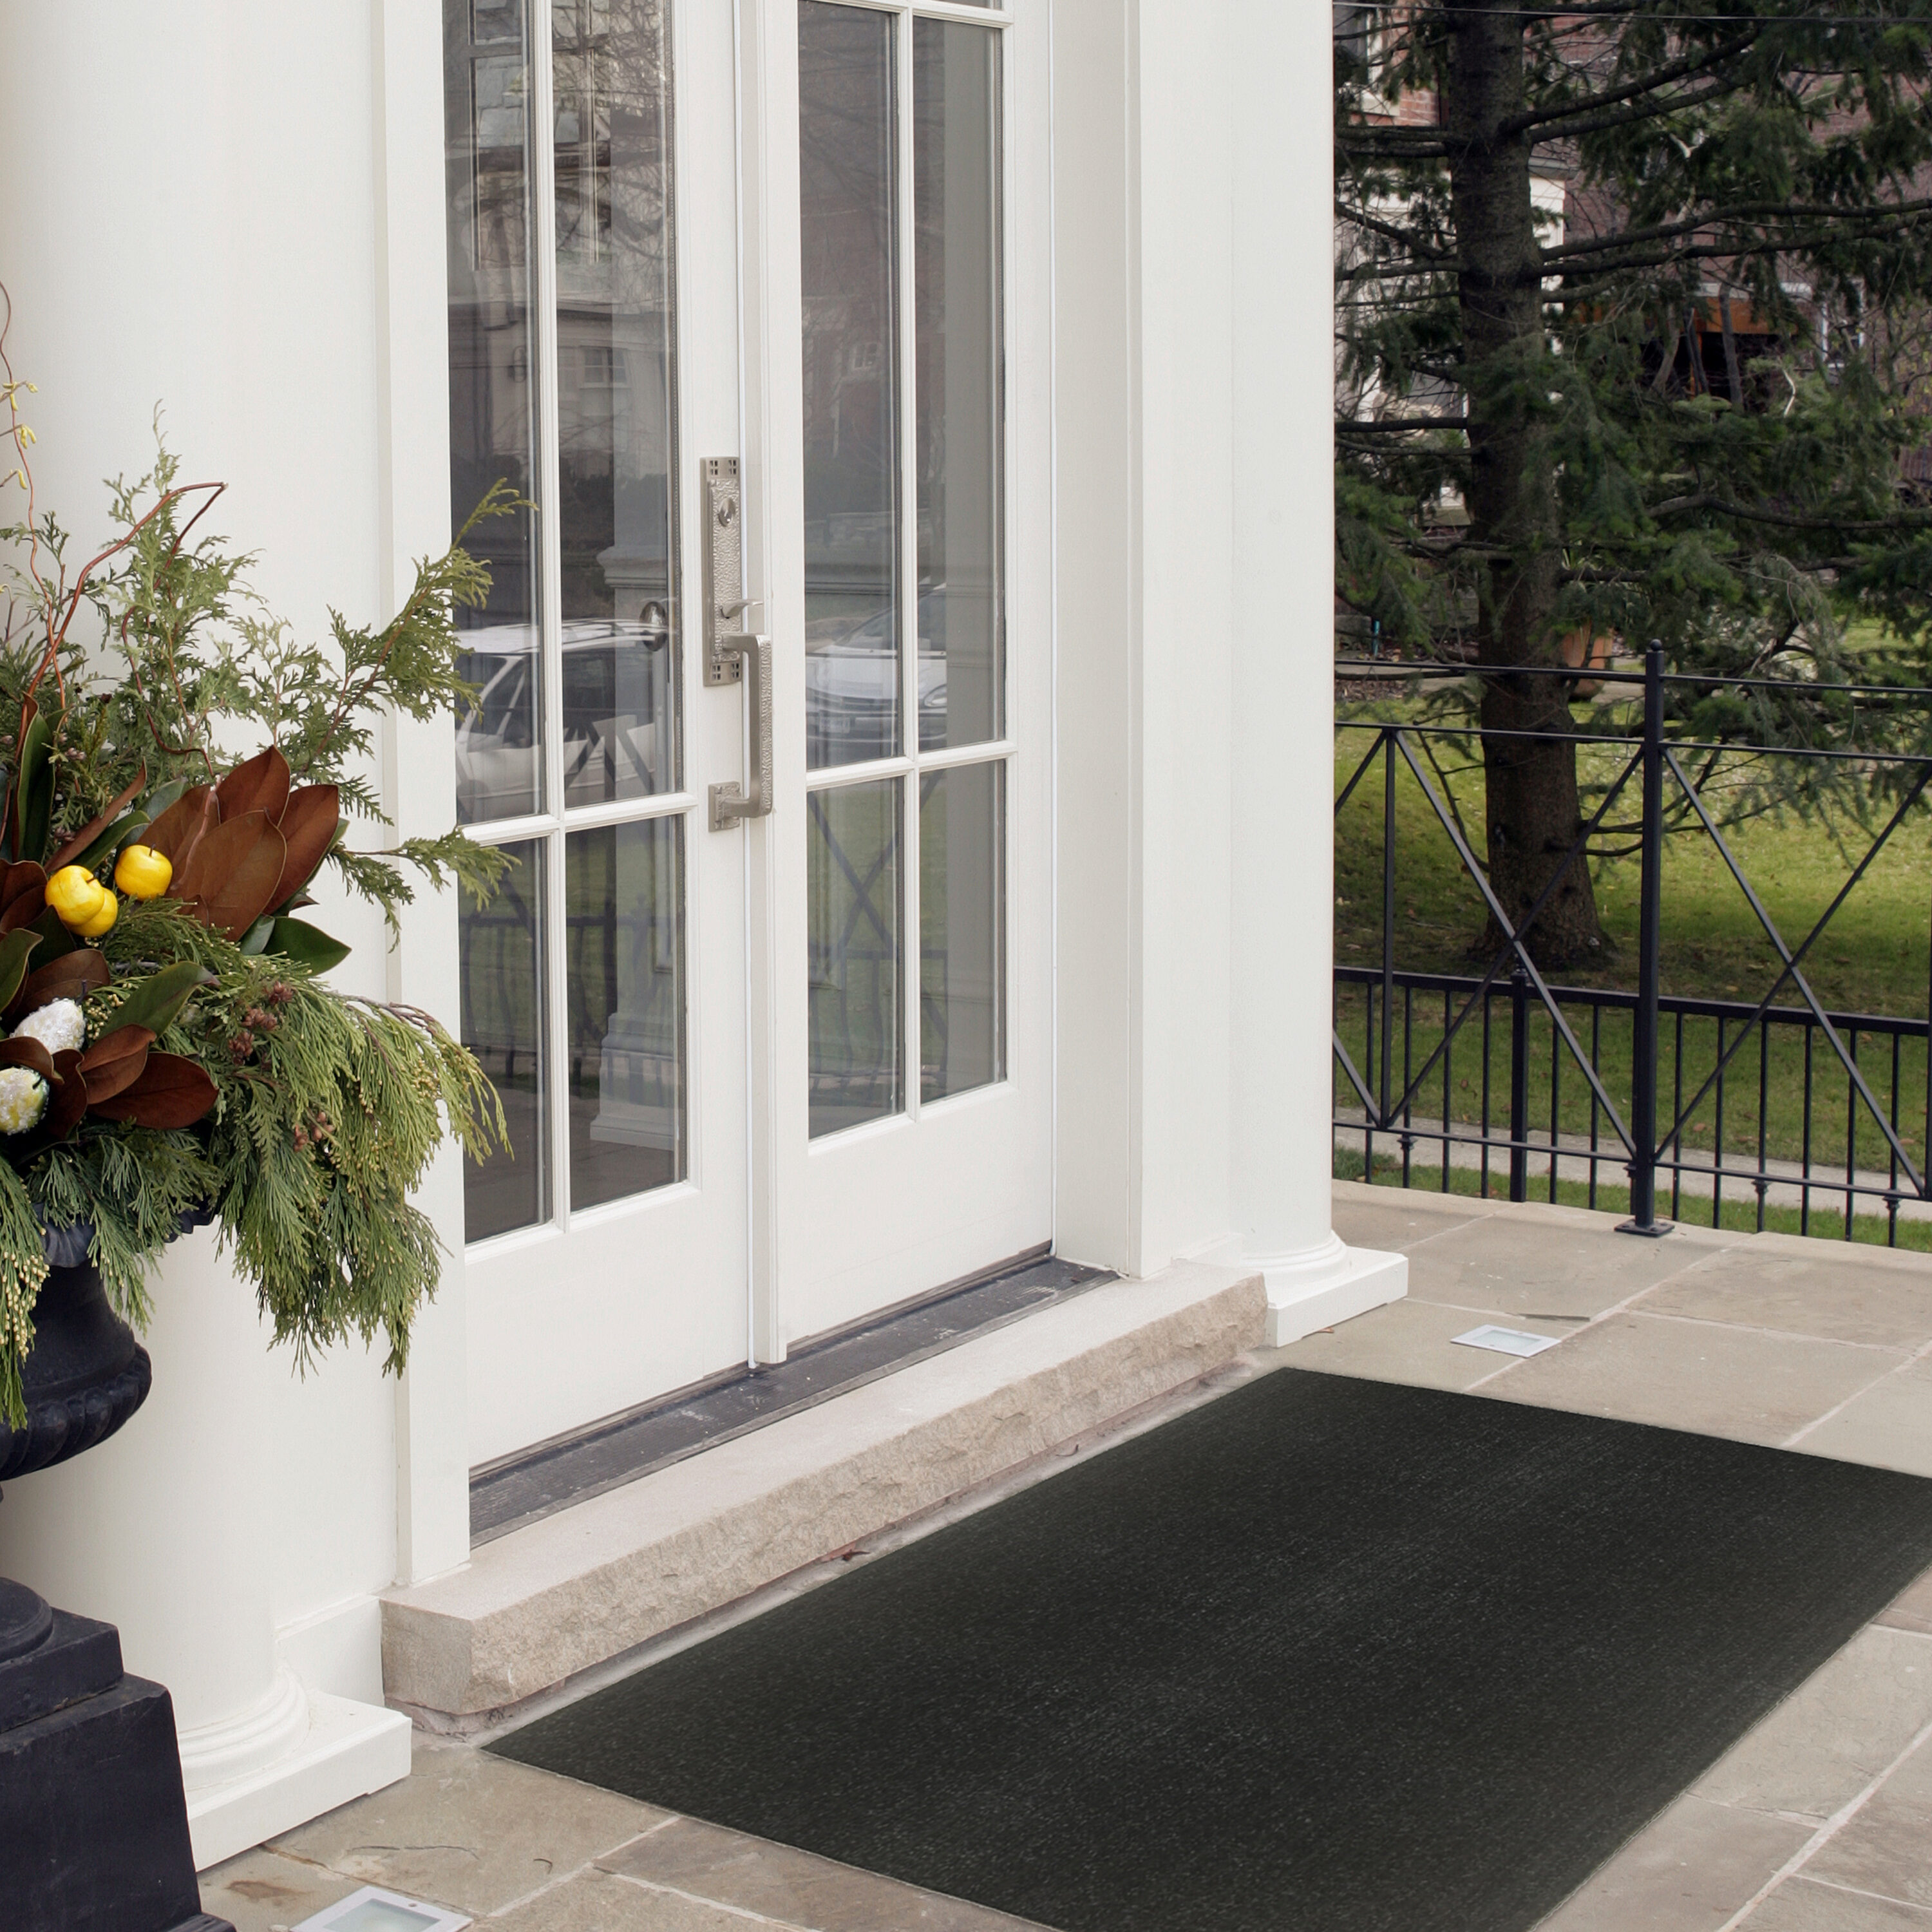 Project Source 4-ft x 6-ft Gray/Silver Rectangular Outdoor Decorative  Utility Mat at